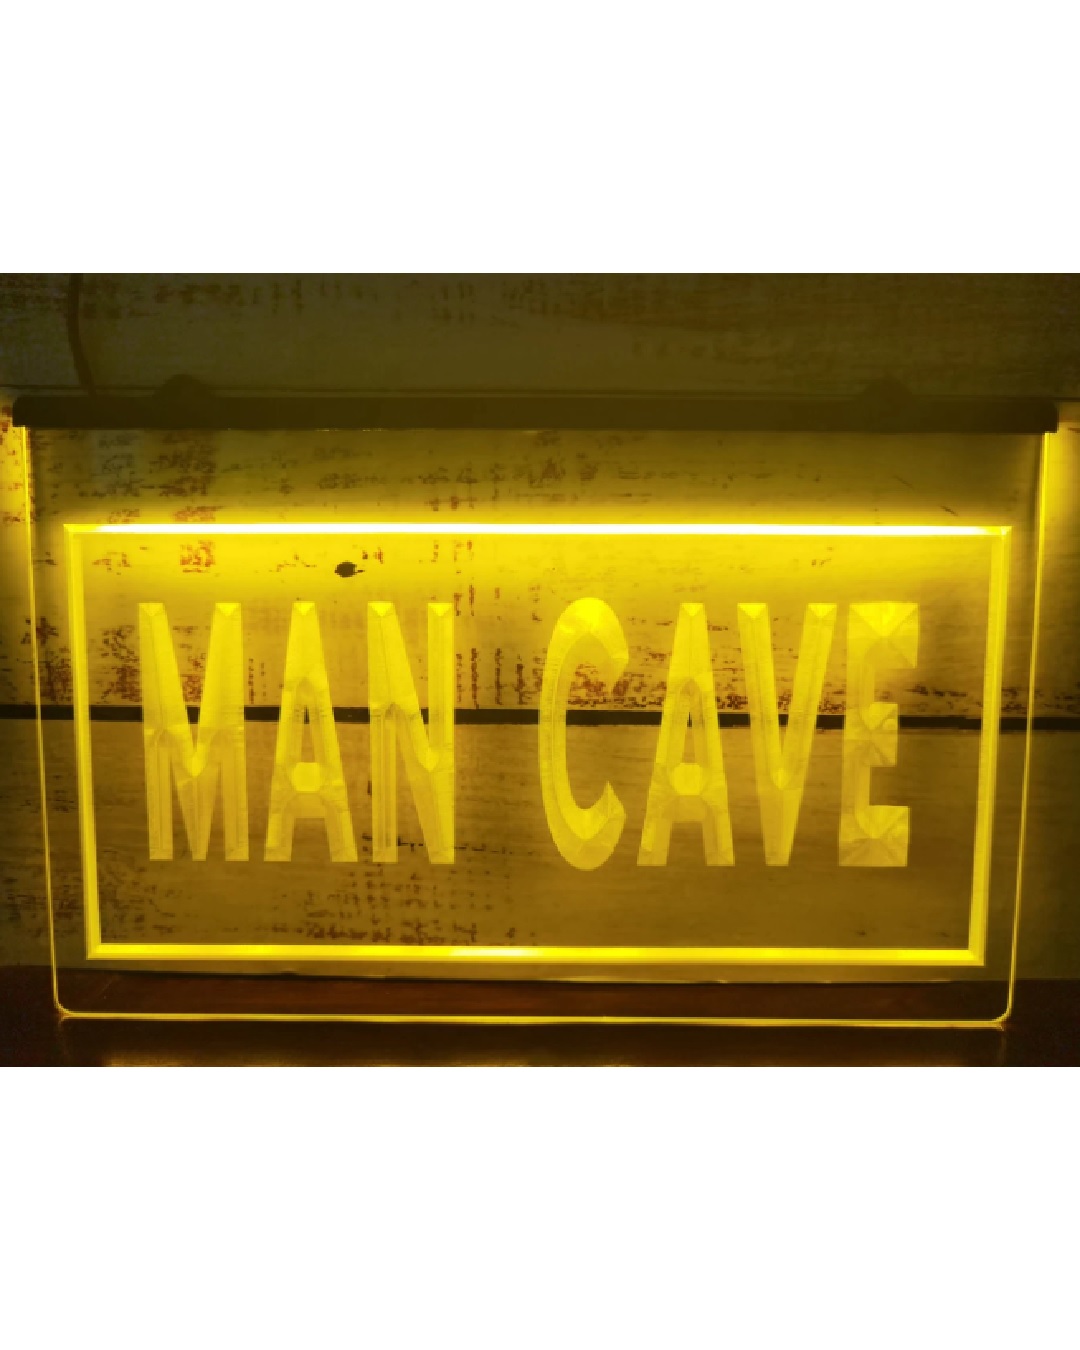 Man cave USB sign in yellow